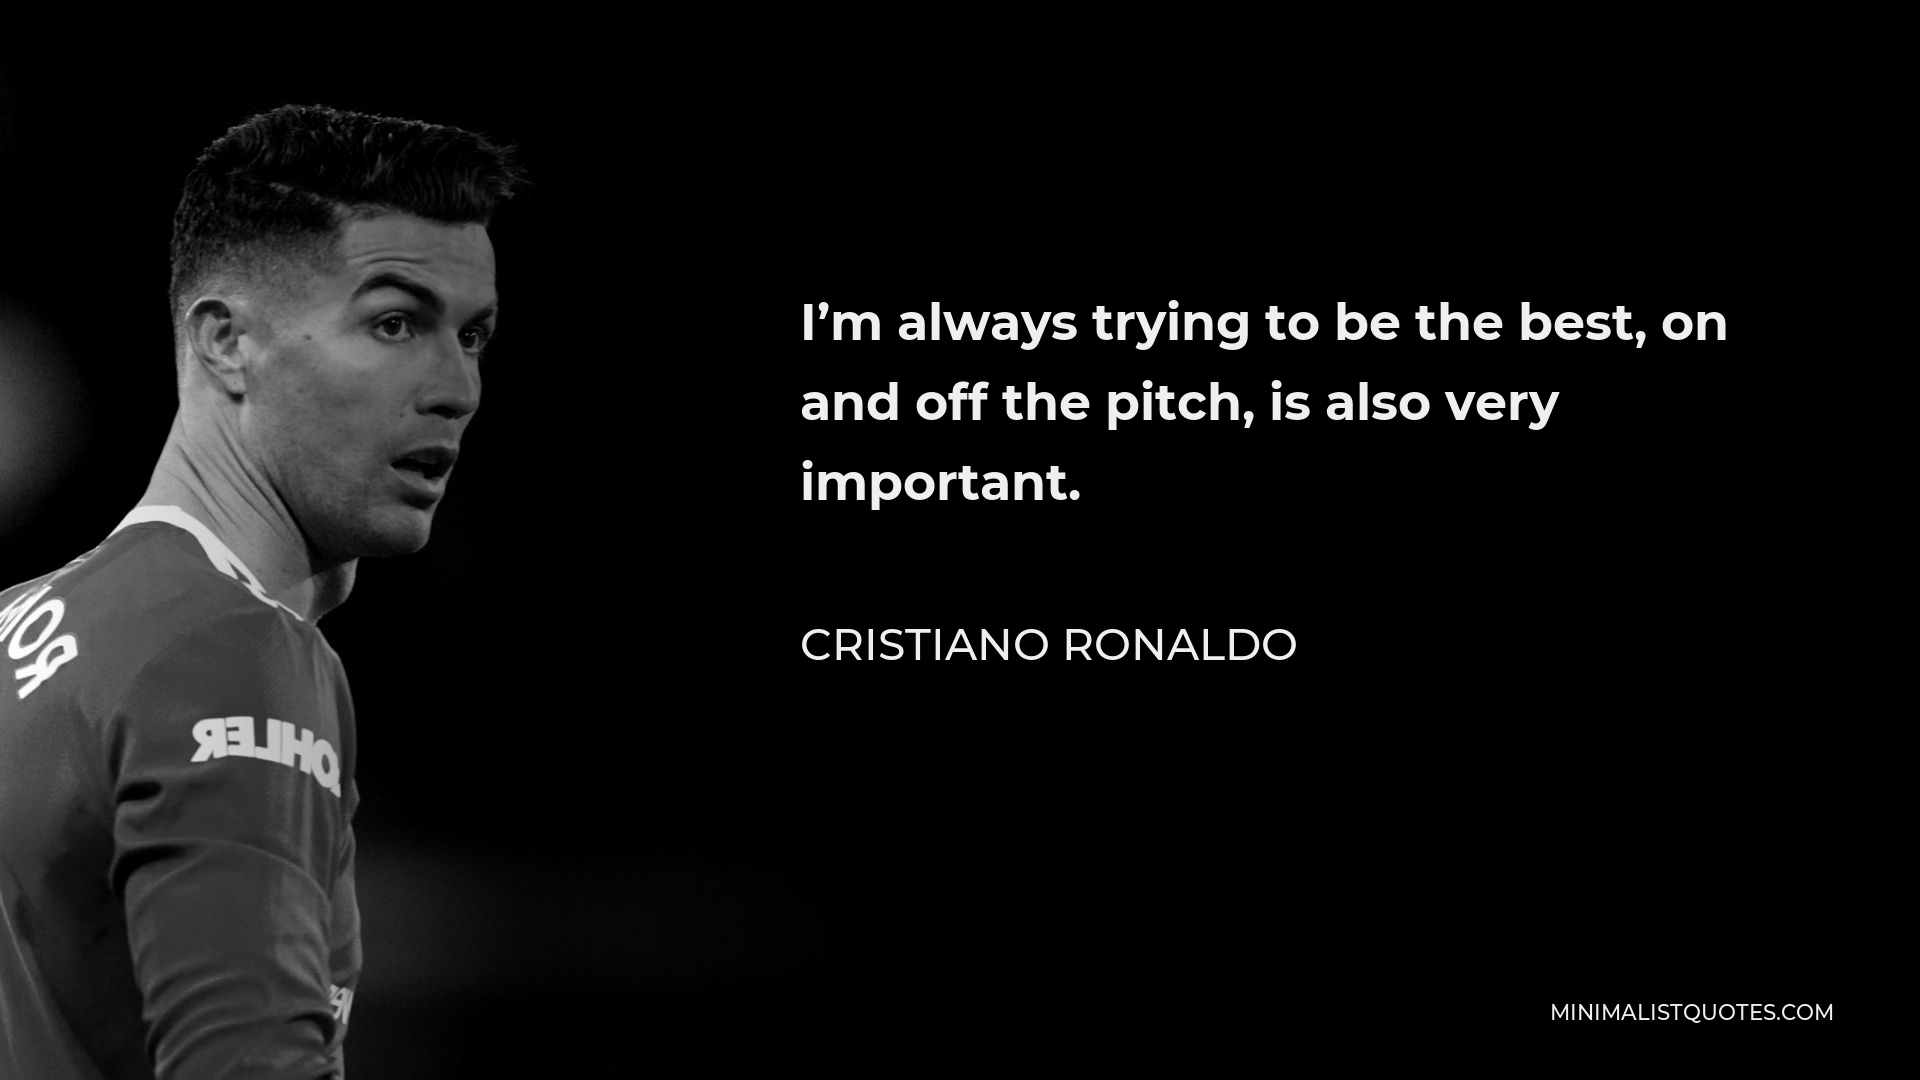 Cristiano Ronaldo Quote - I’m always trying to be the best, on and off the pitch, is also very important.